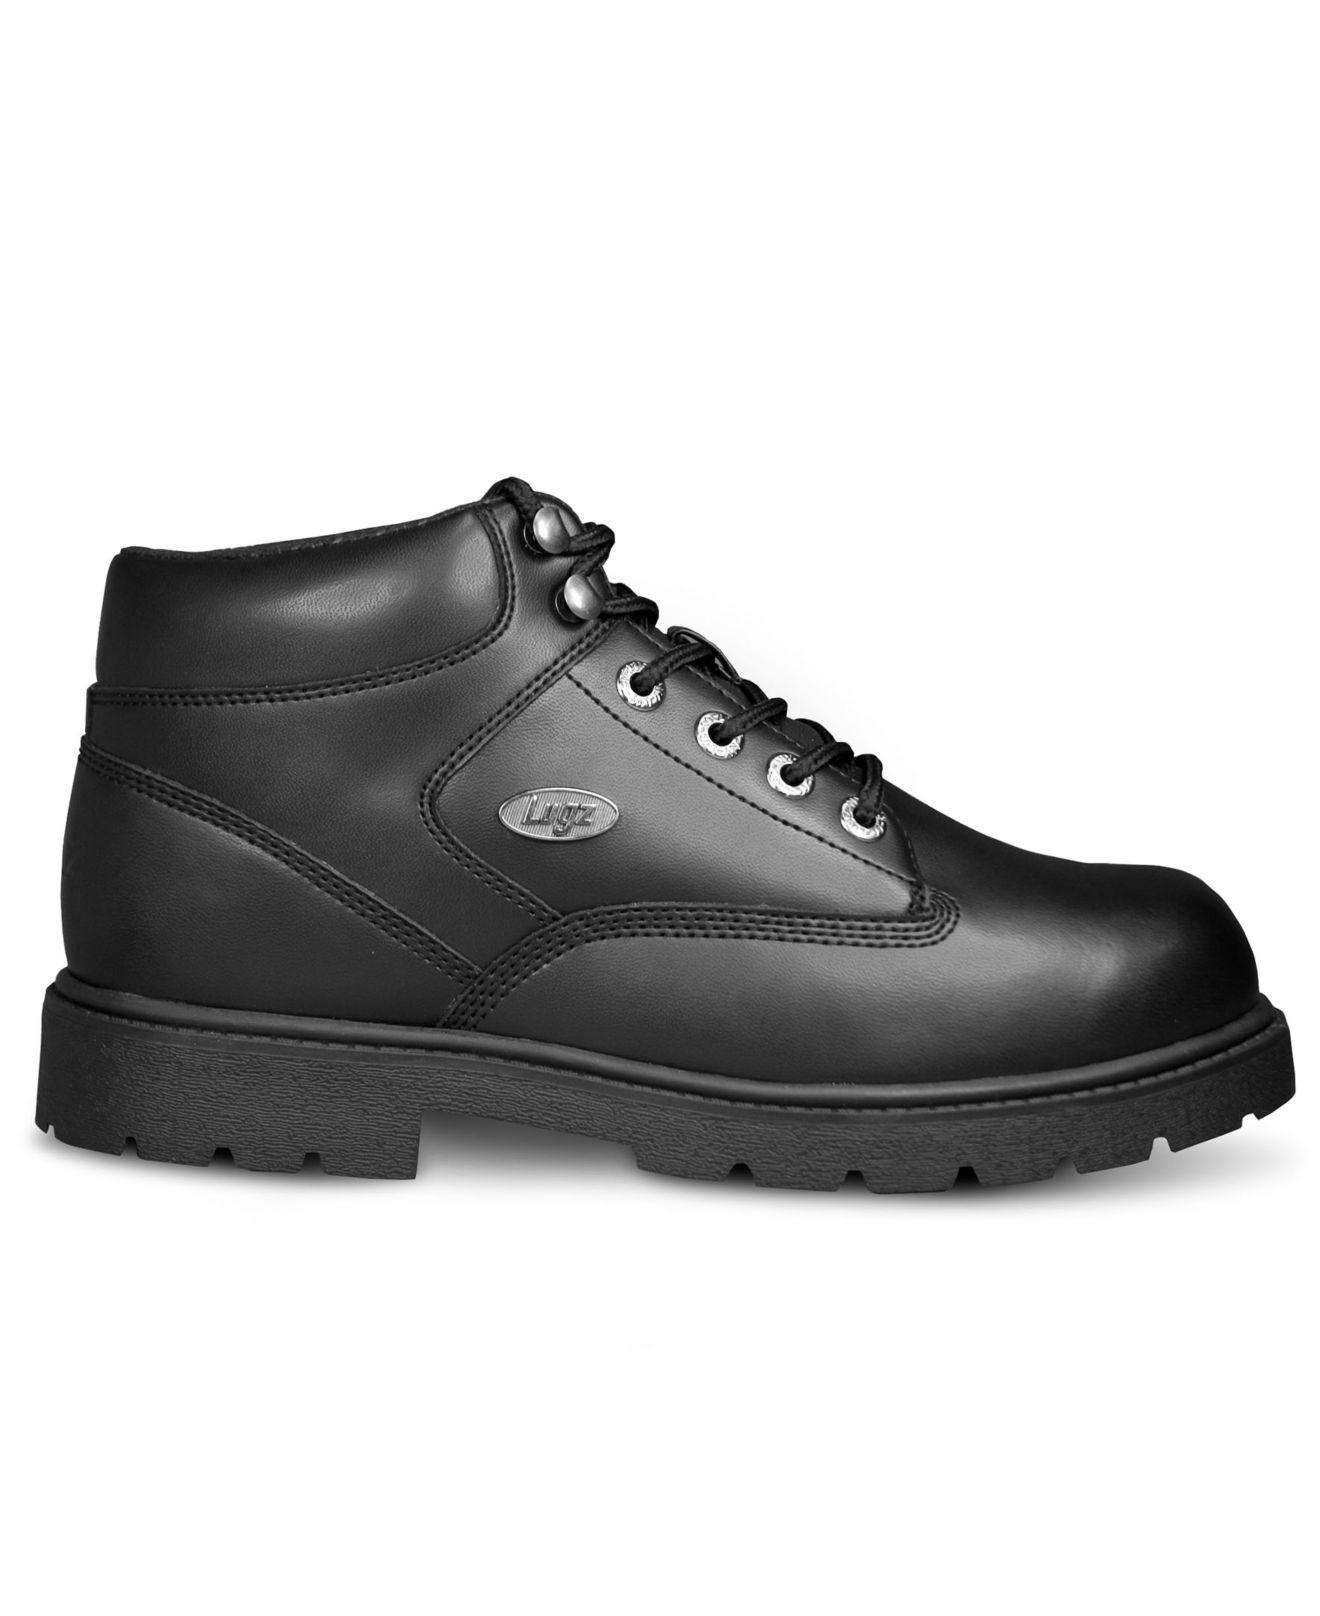 Lugz Leather Zone Hi Sr Work Boot in Black for Men - Lyst